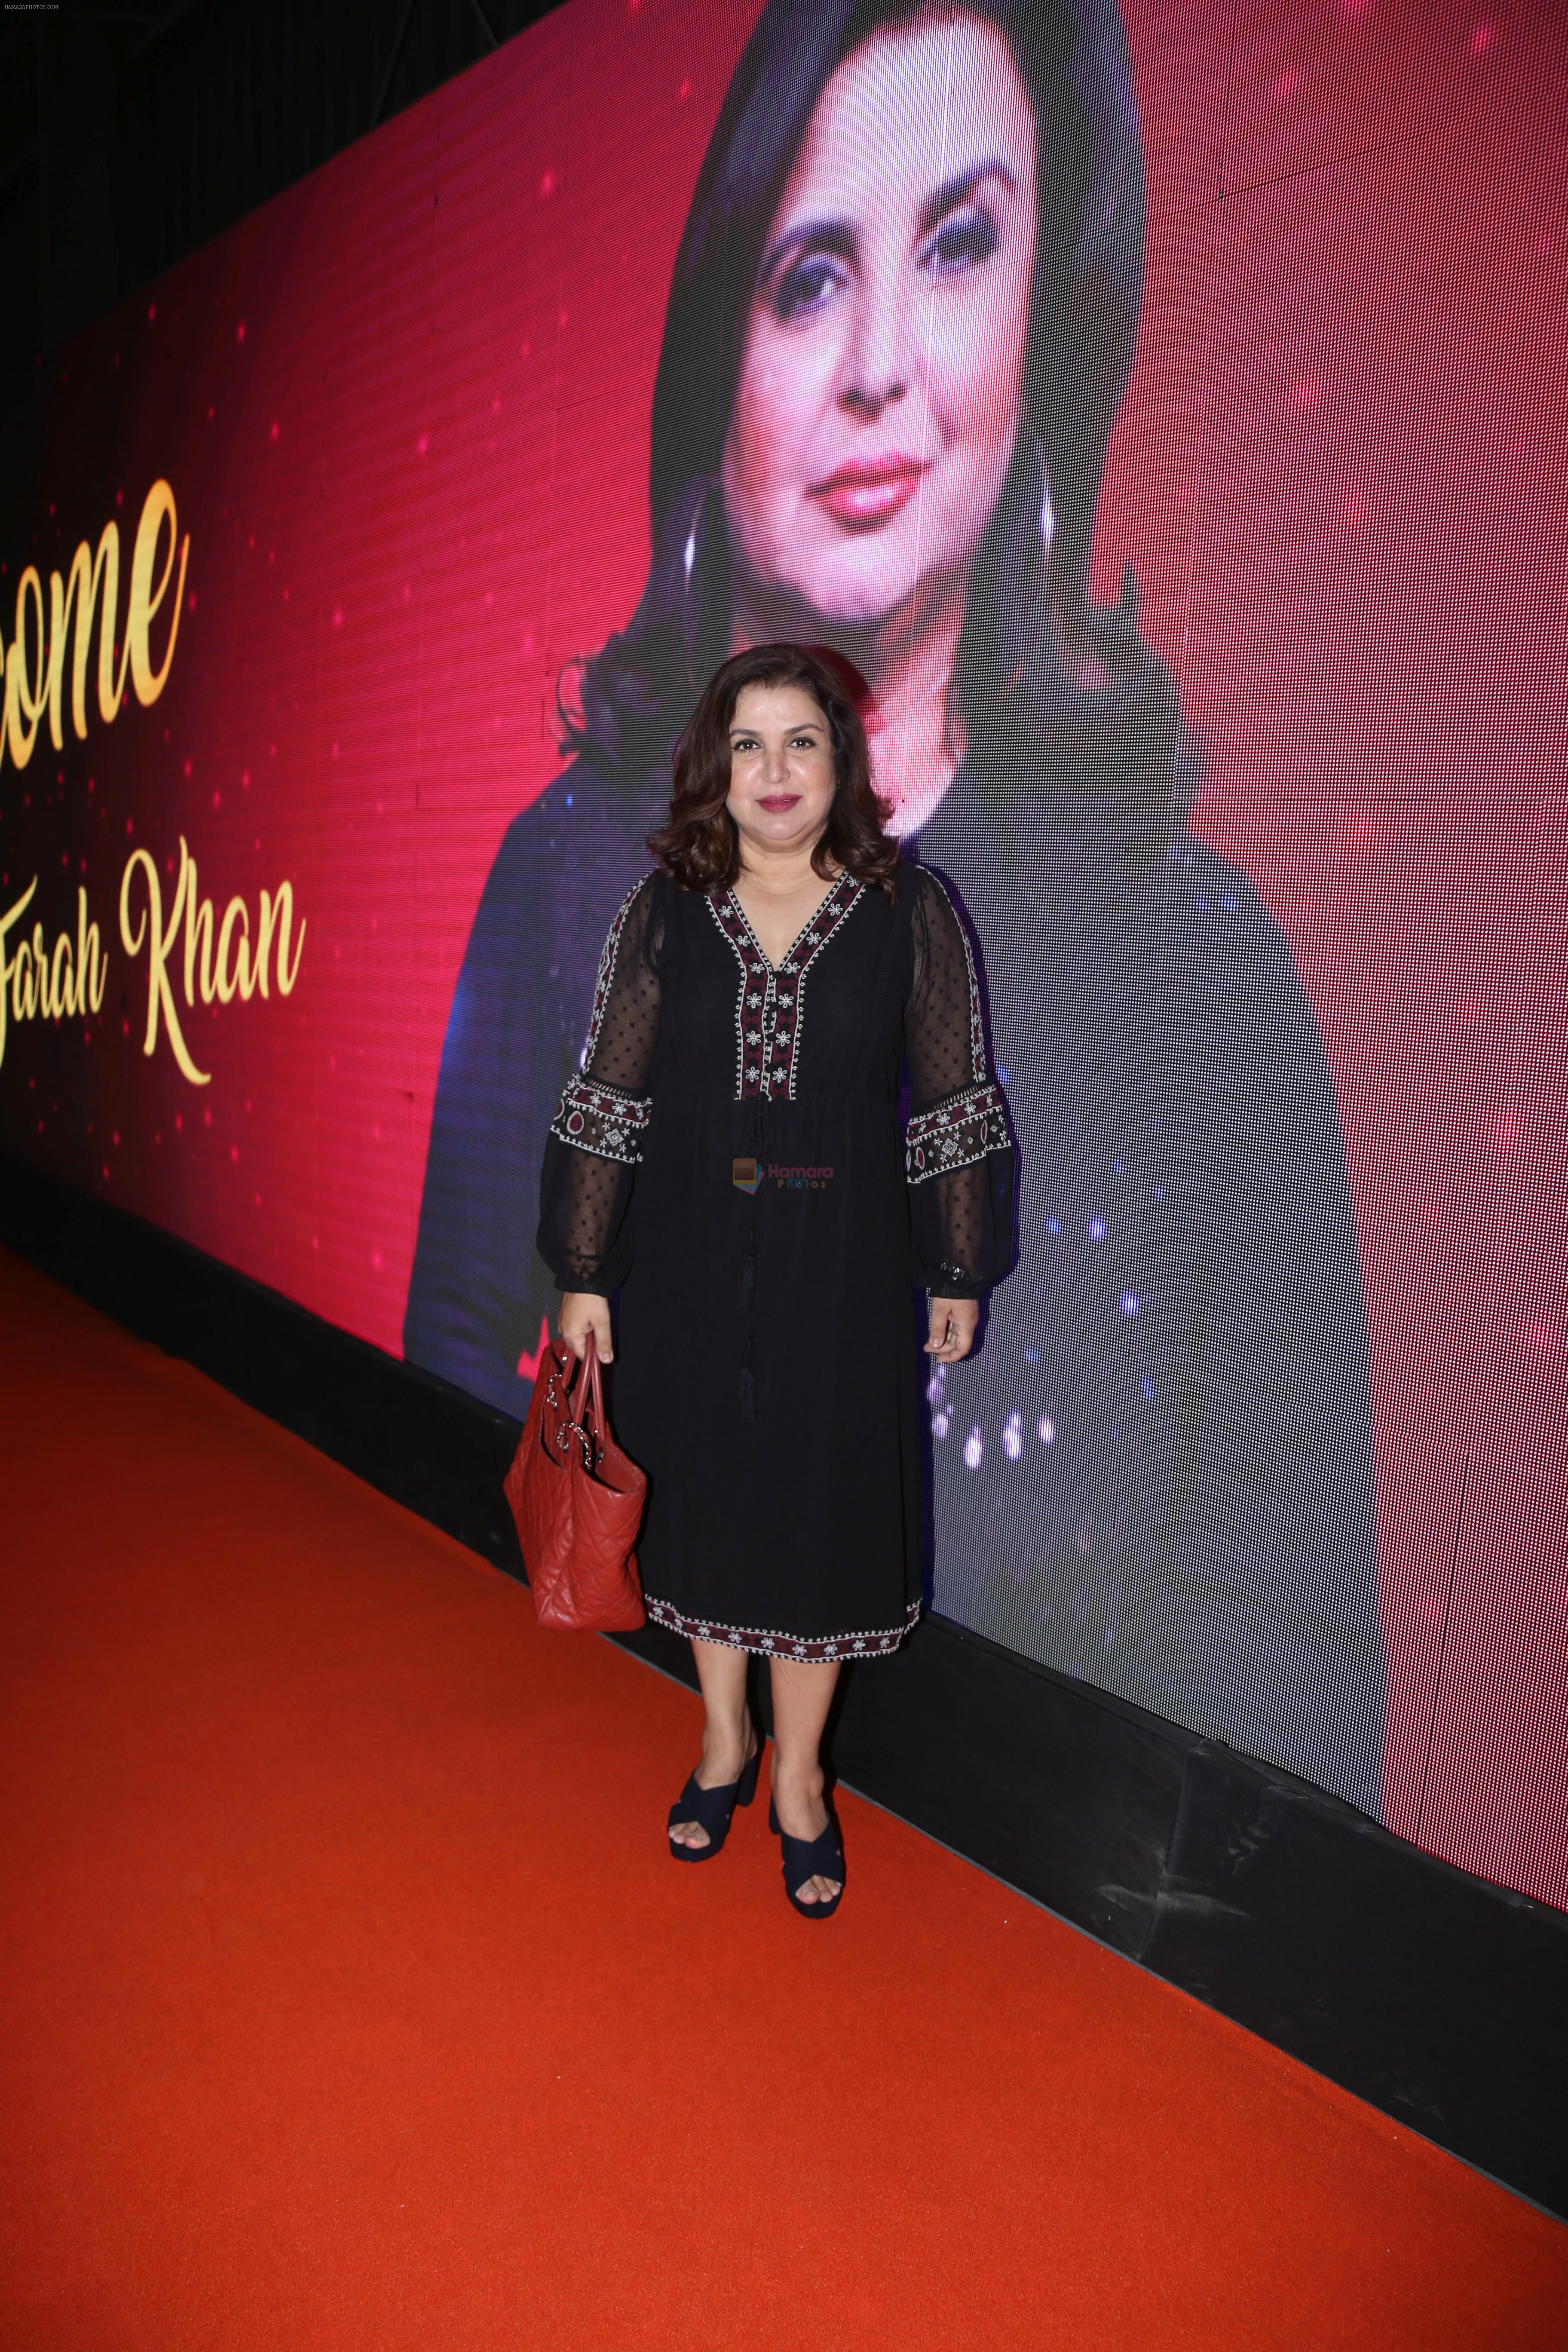 Farah Khan at the Big Cine Expo in goregaon on 26th AUg 2019